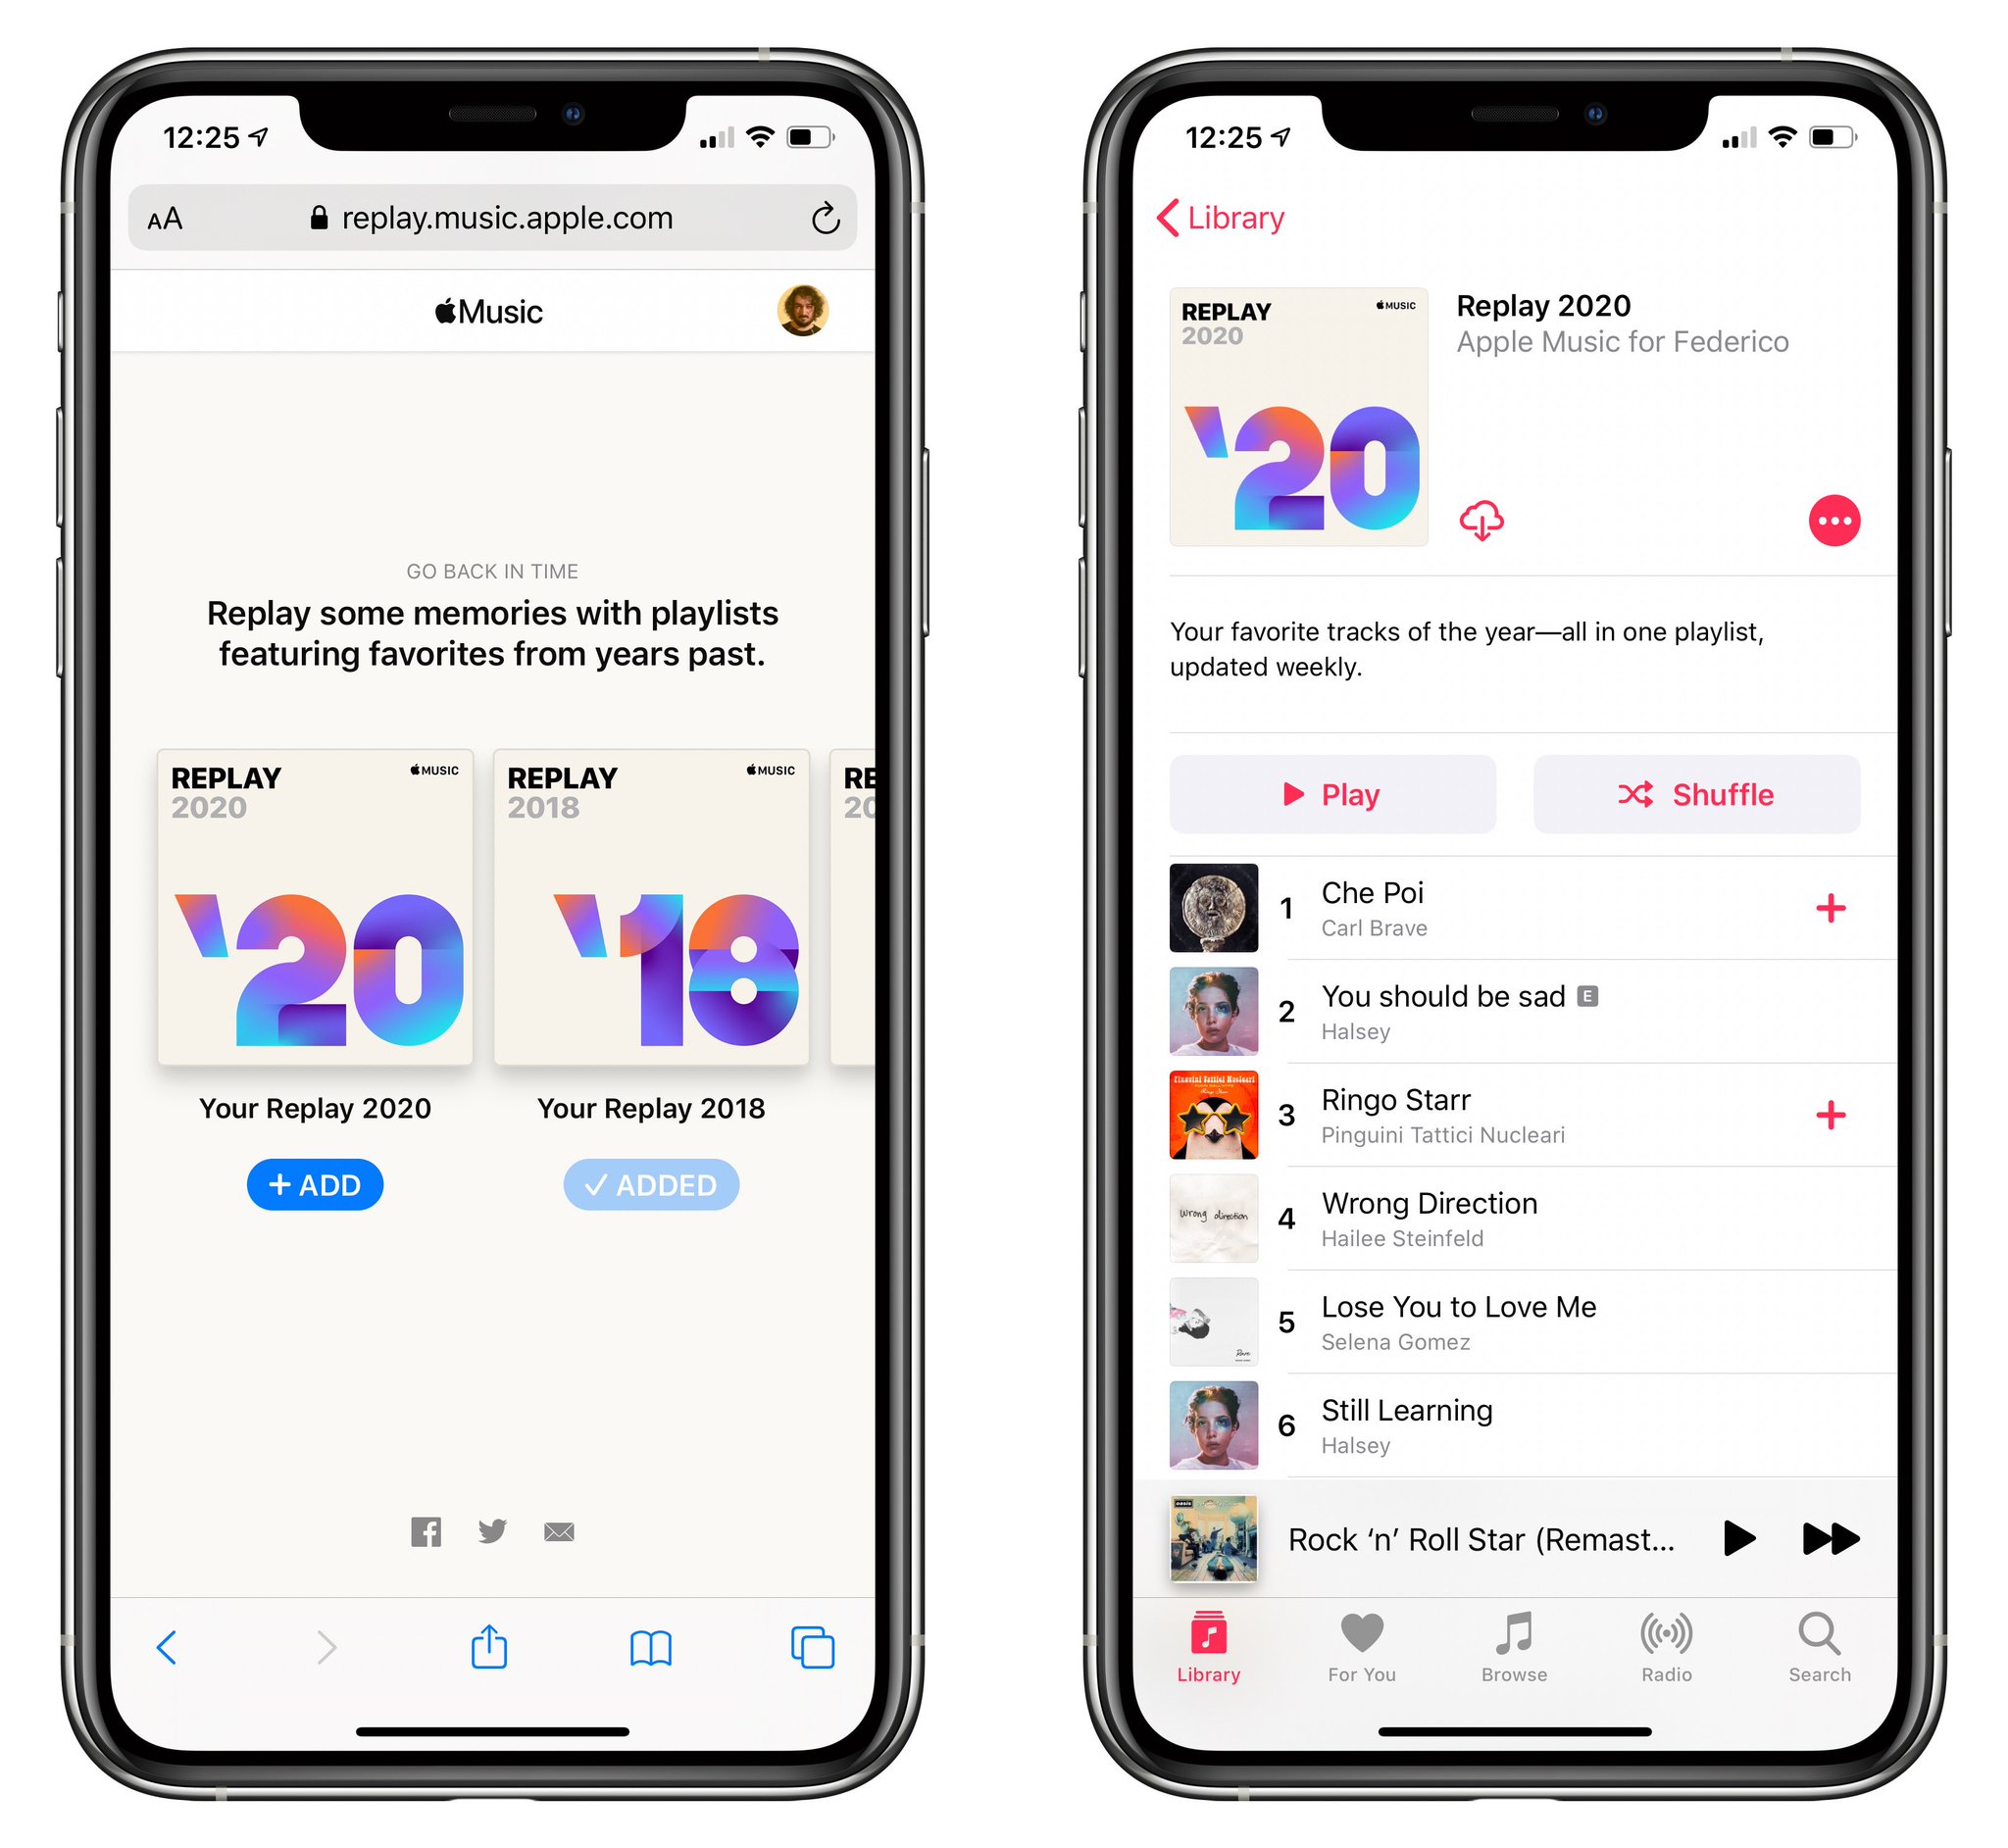 You Can Now Add The Auto Refreshing Replay 2020 Playlist To Your Apple Music Library